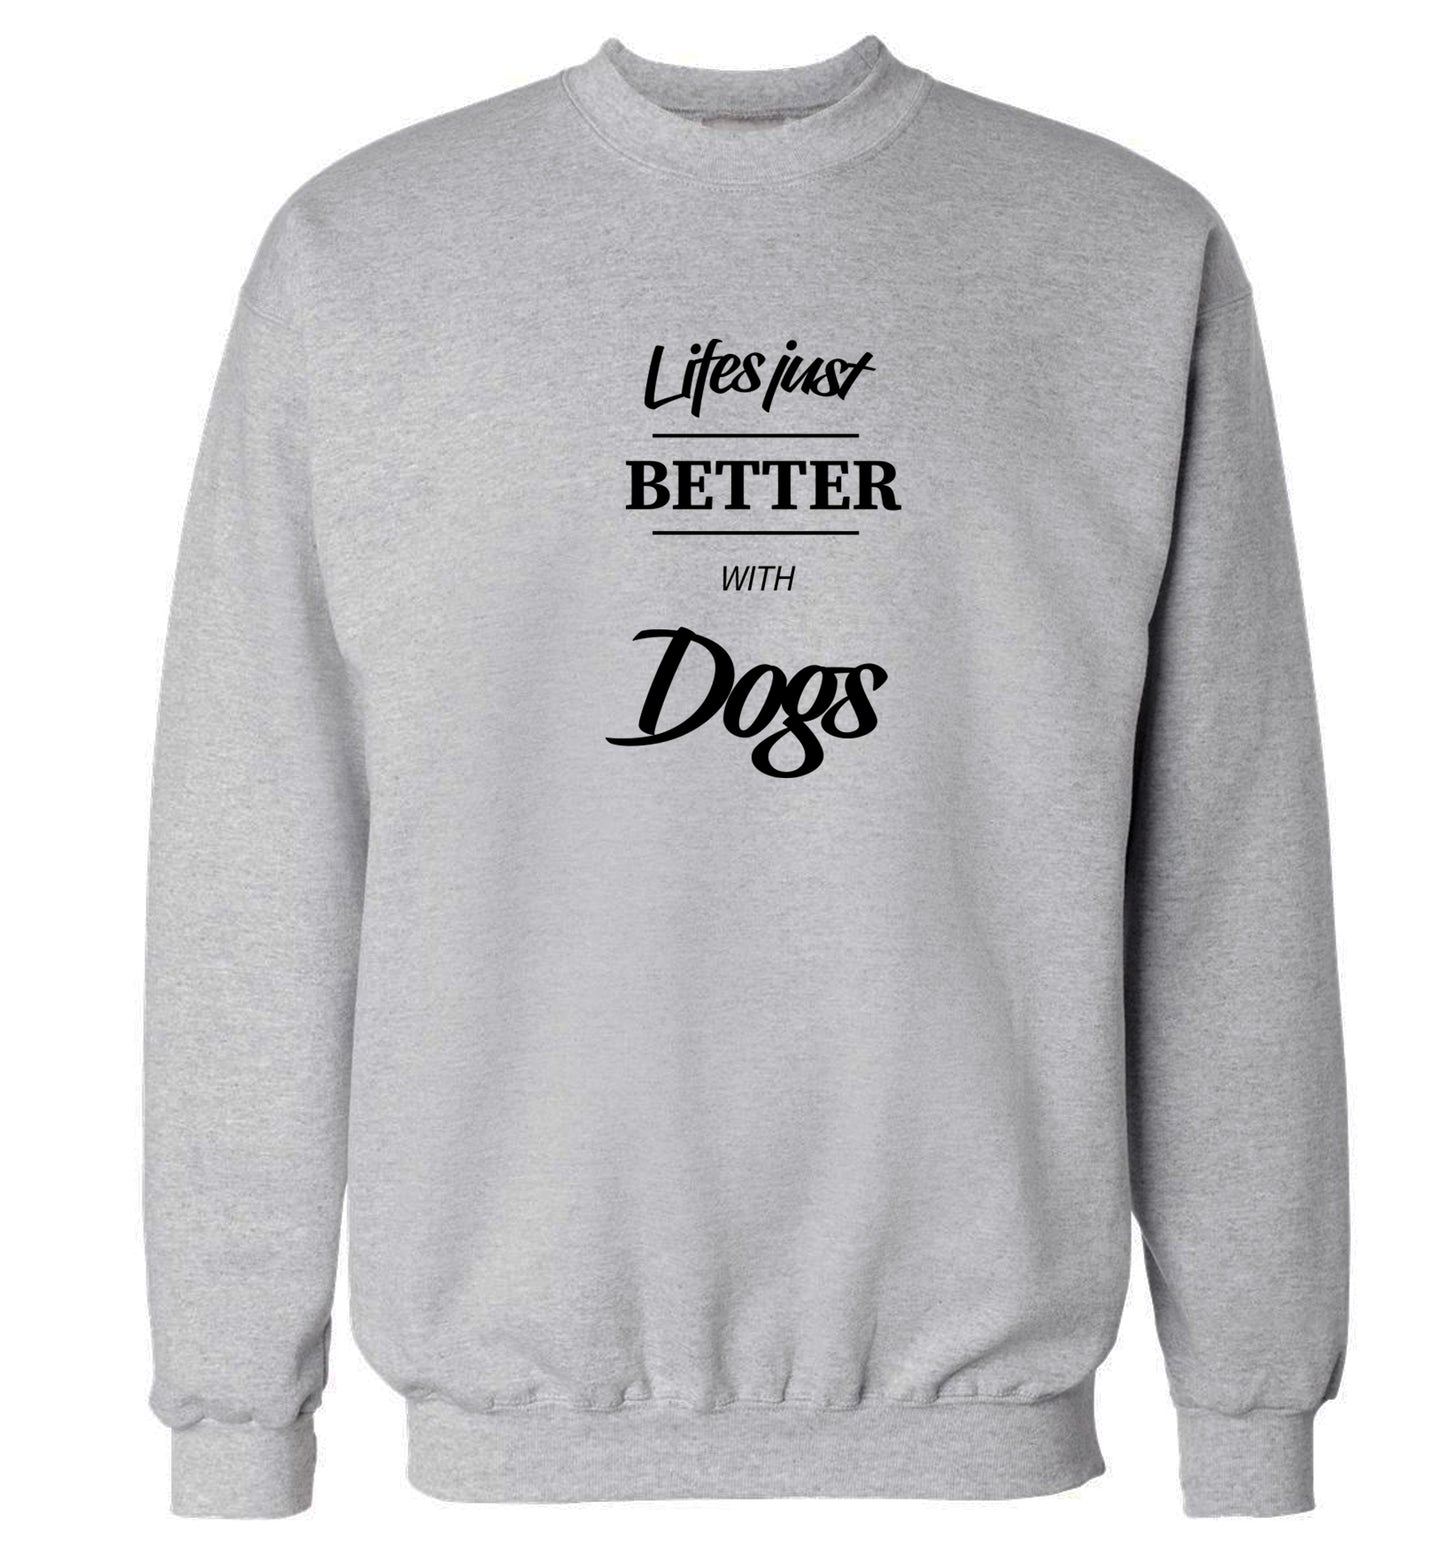 life is better with dogs Adult's unisex grey Sweater 2XL